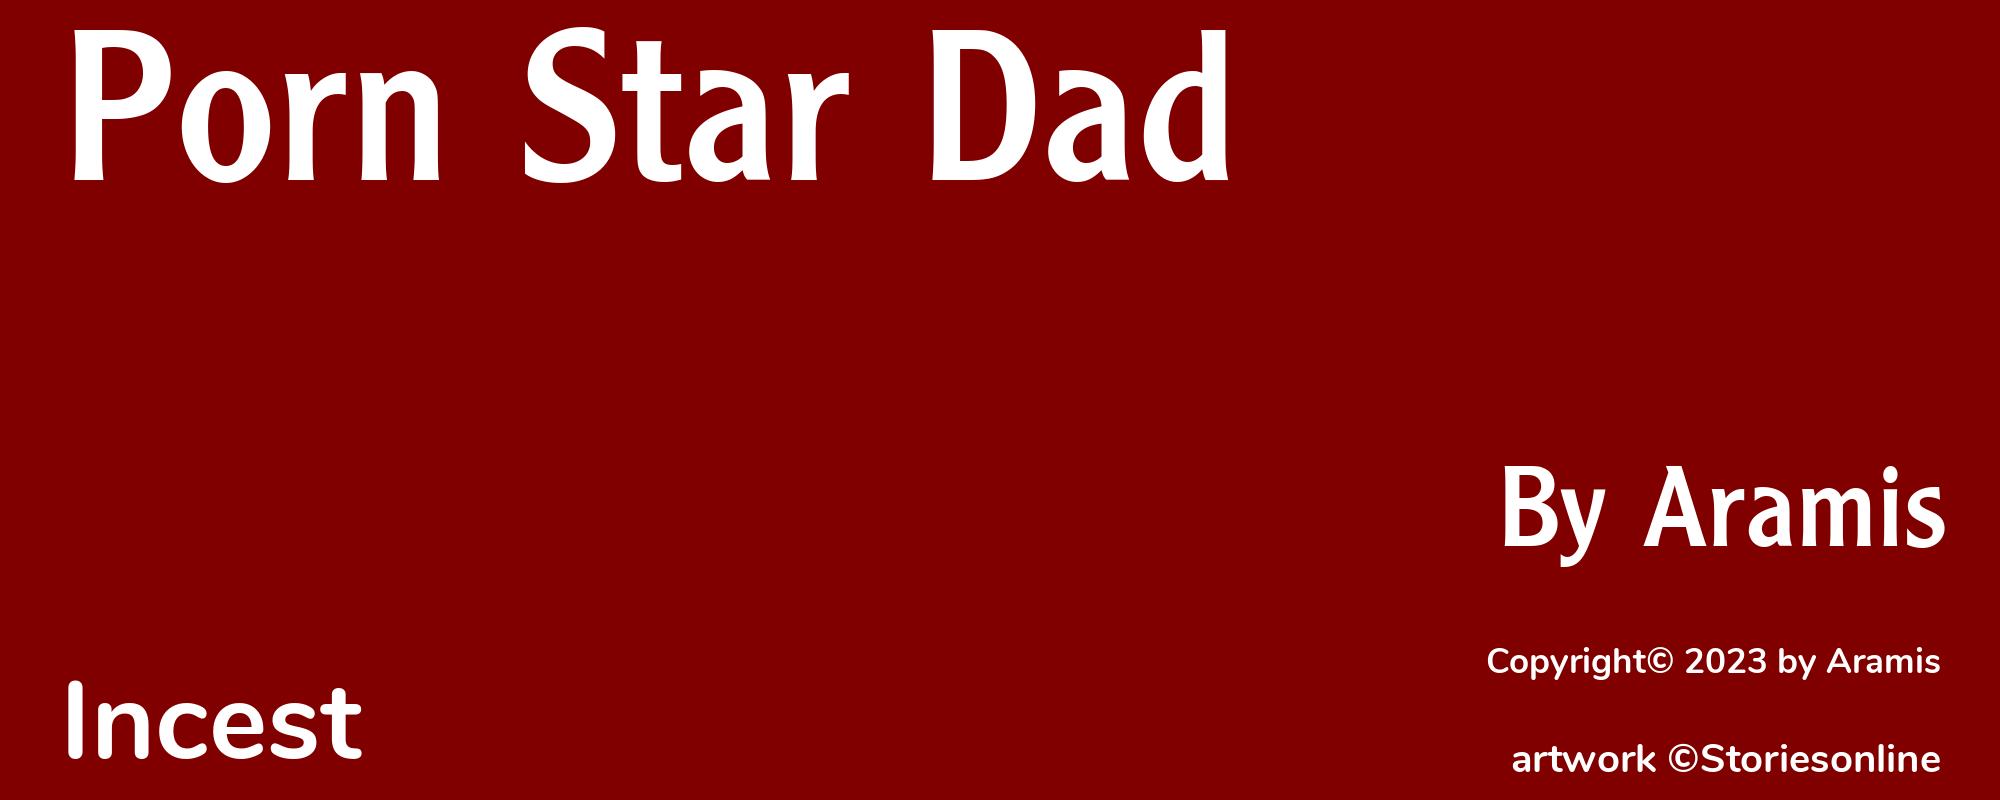 Porn Star Dad  - Cover